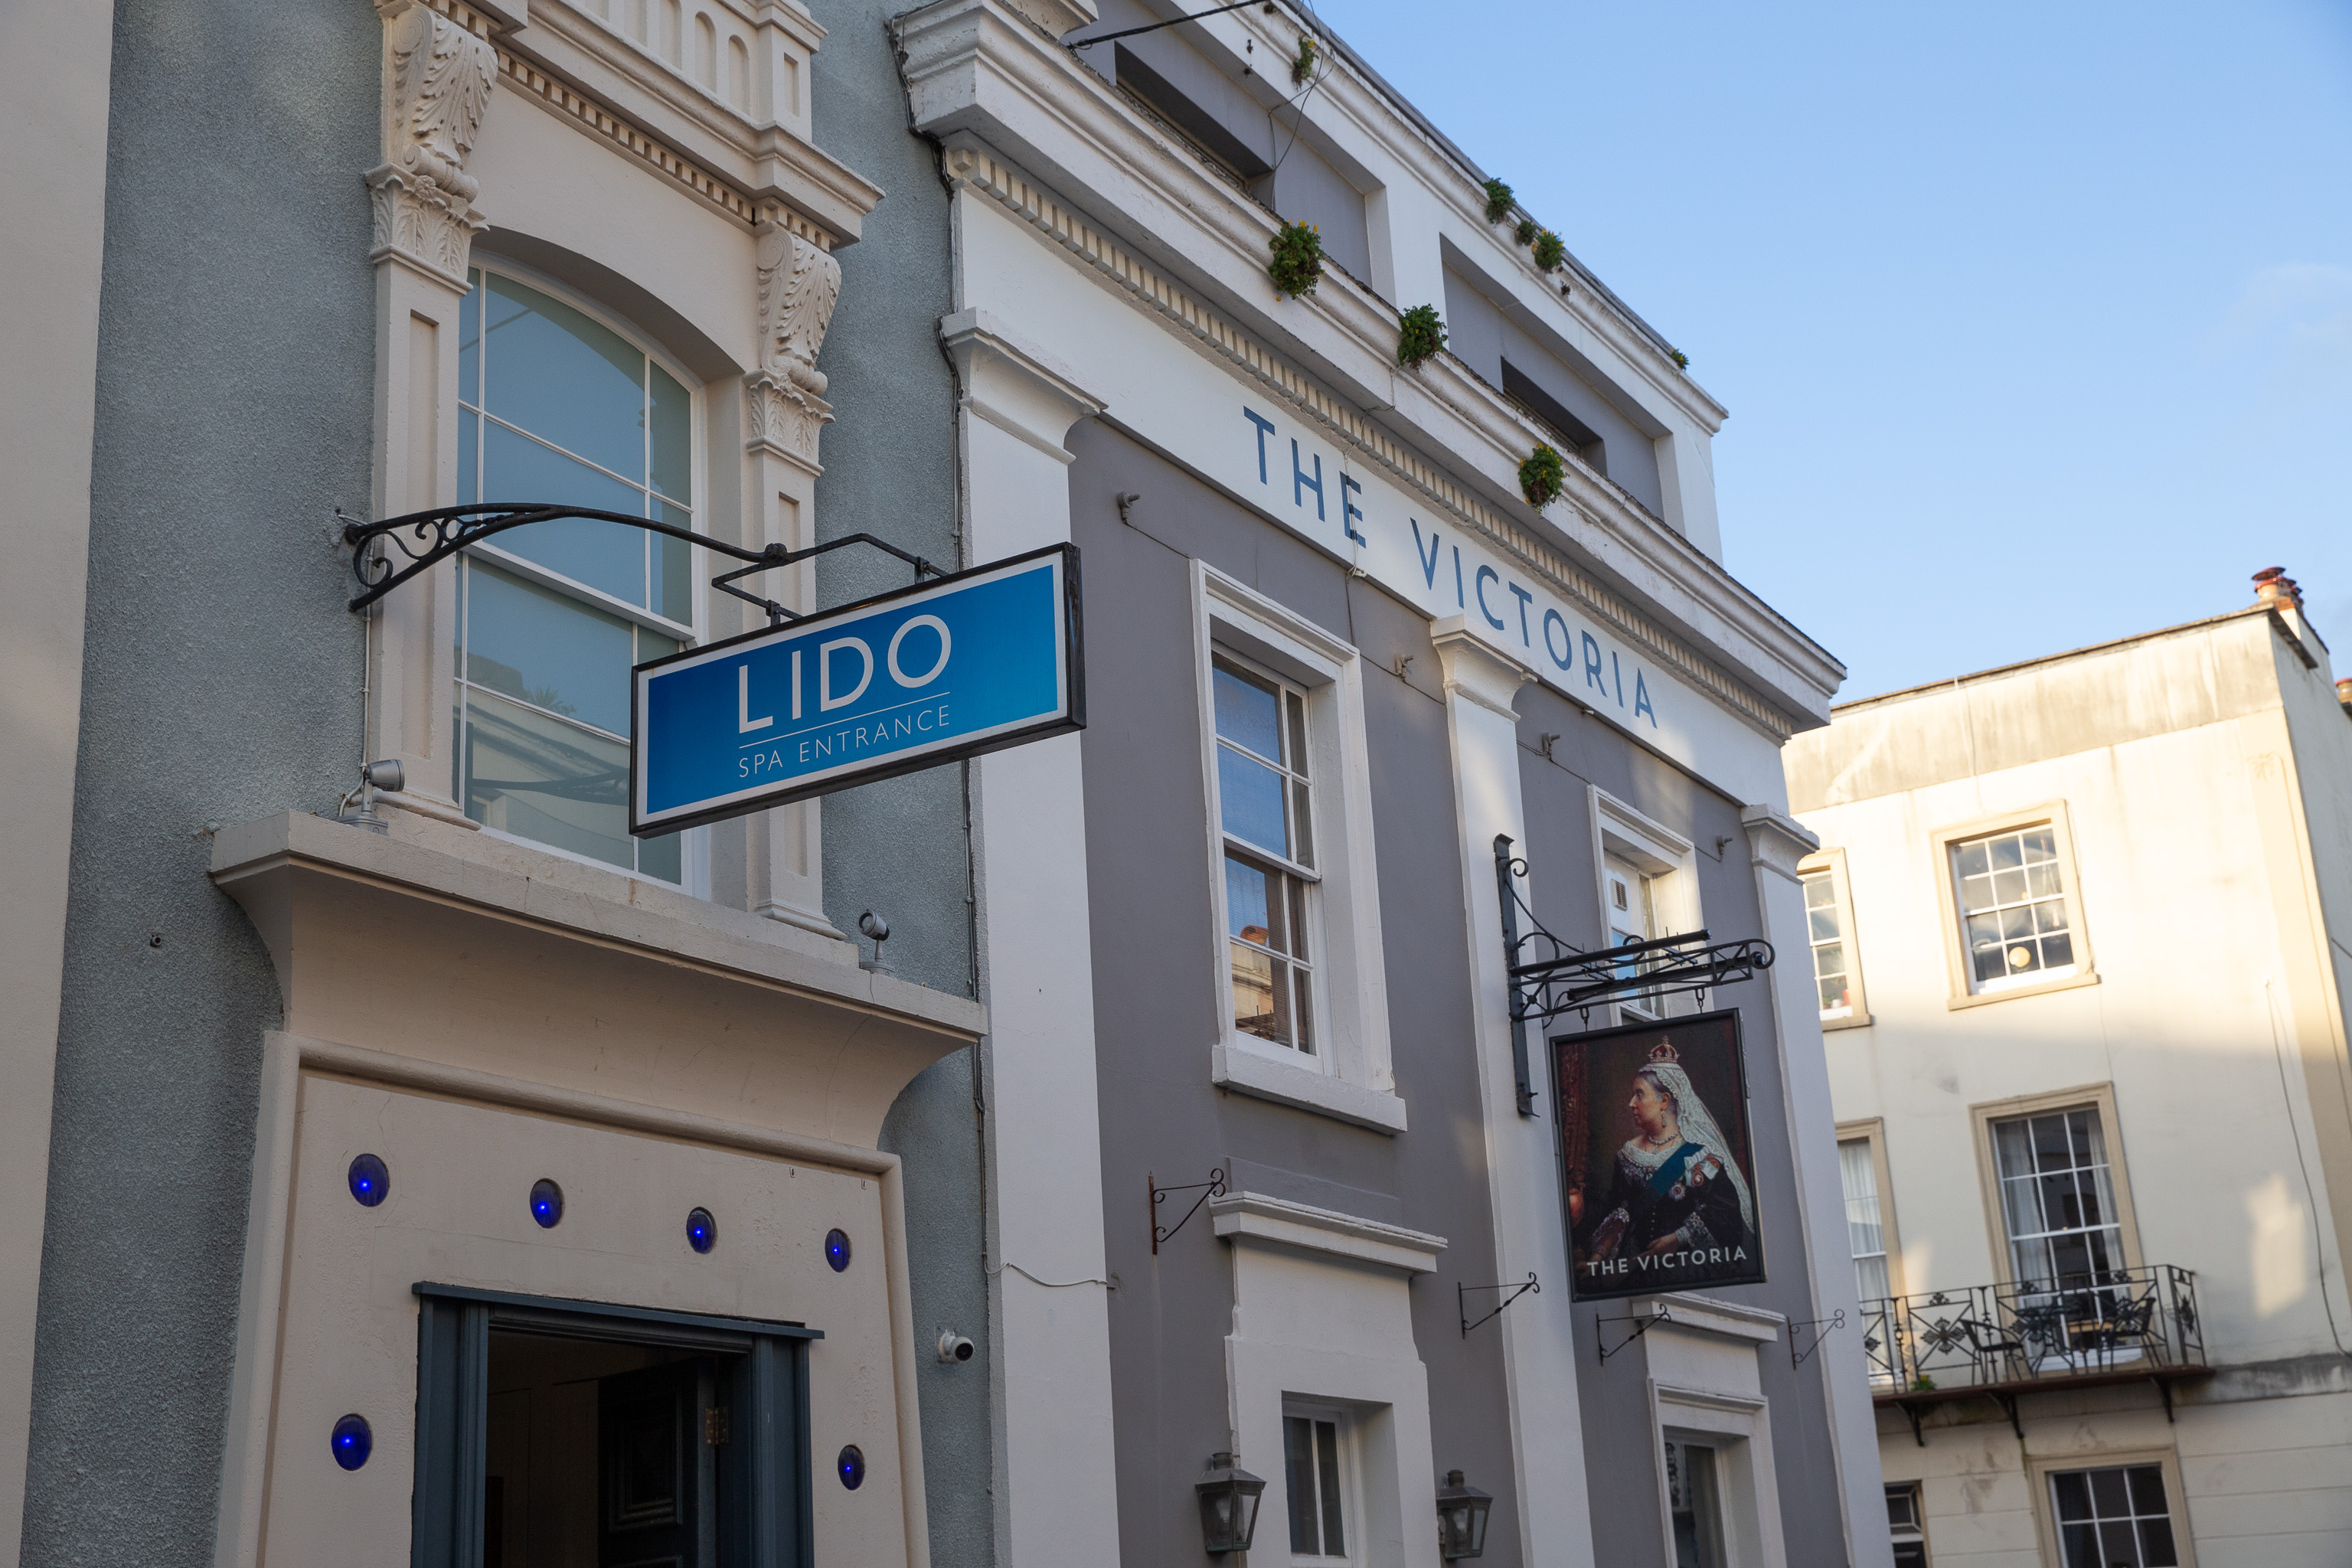 Lido
The Lido, as once saved by Dorothy Brown, the tireless conservationist whose plaque we saw earlier.
